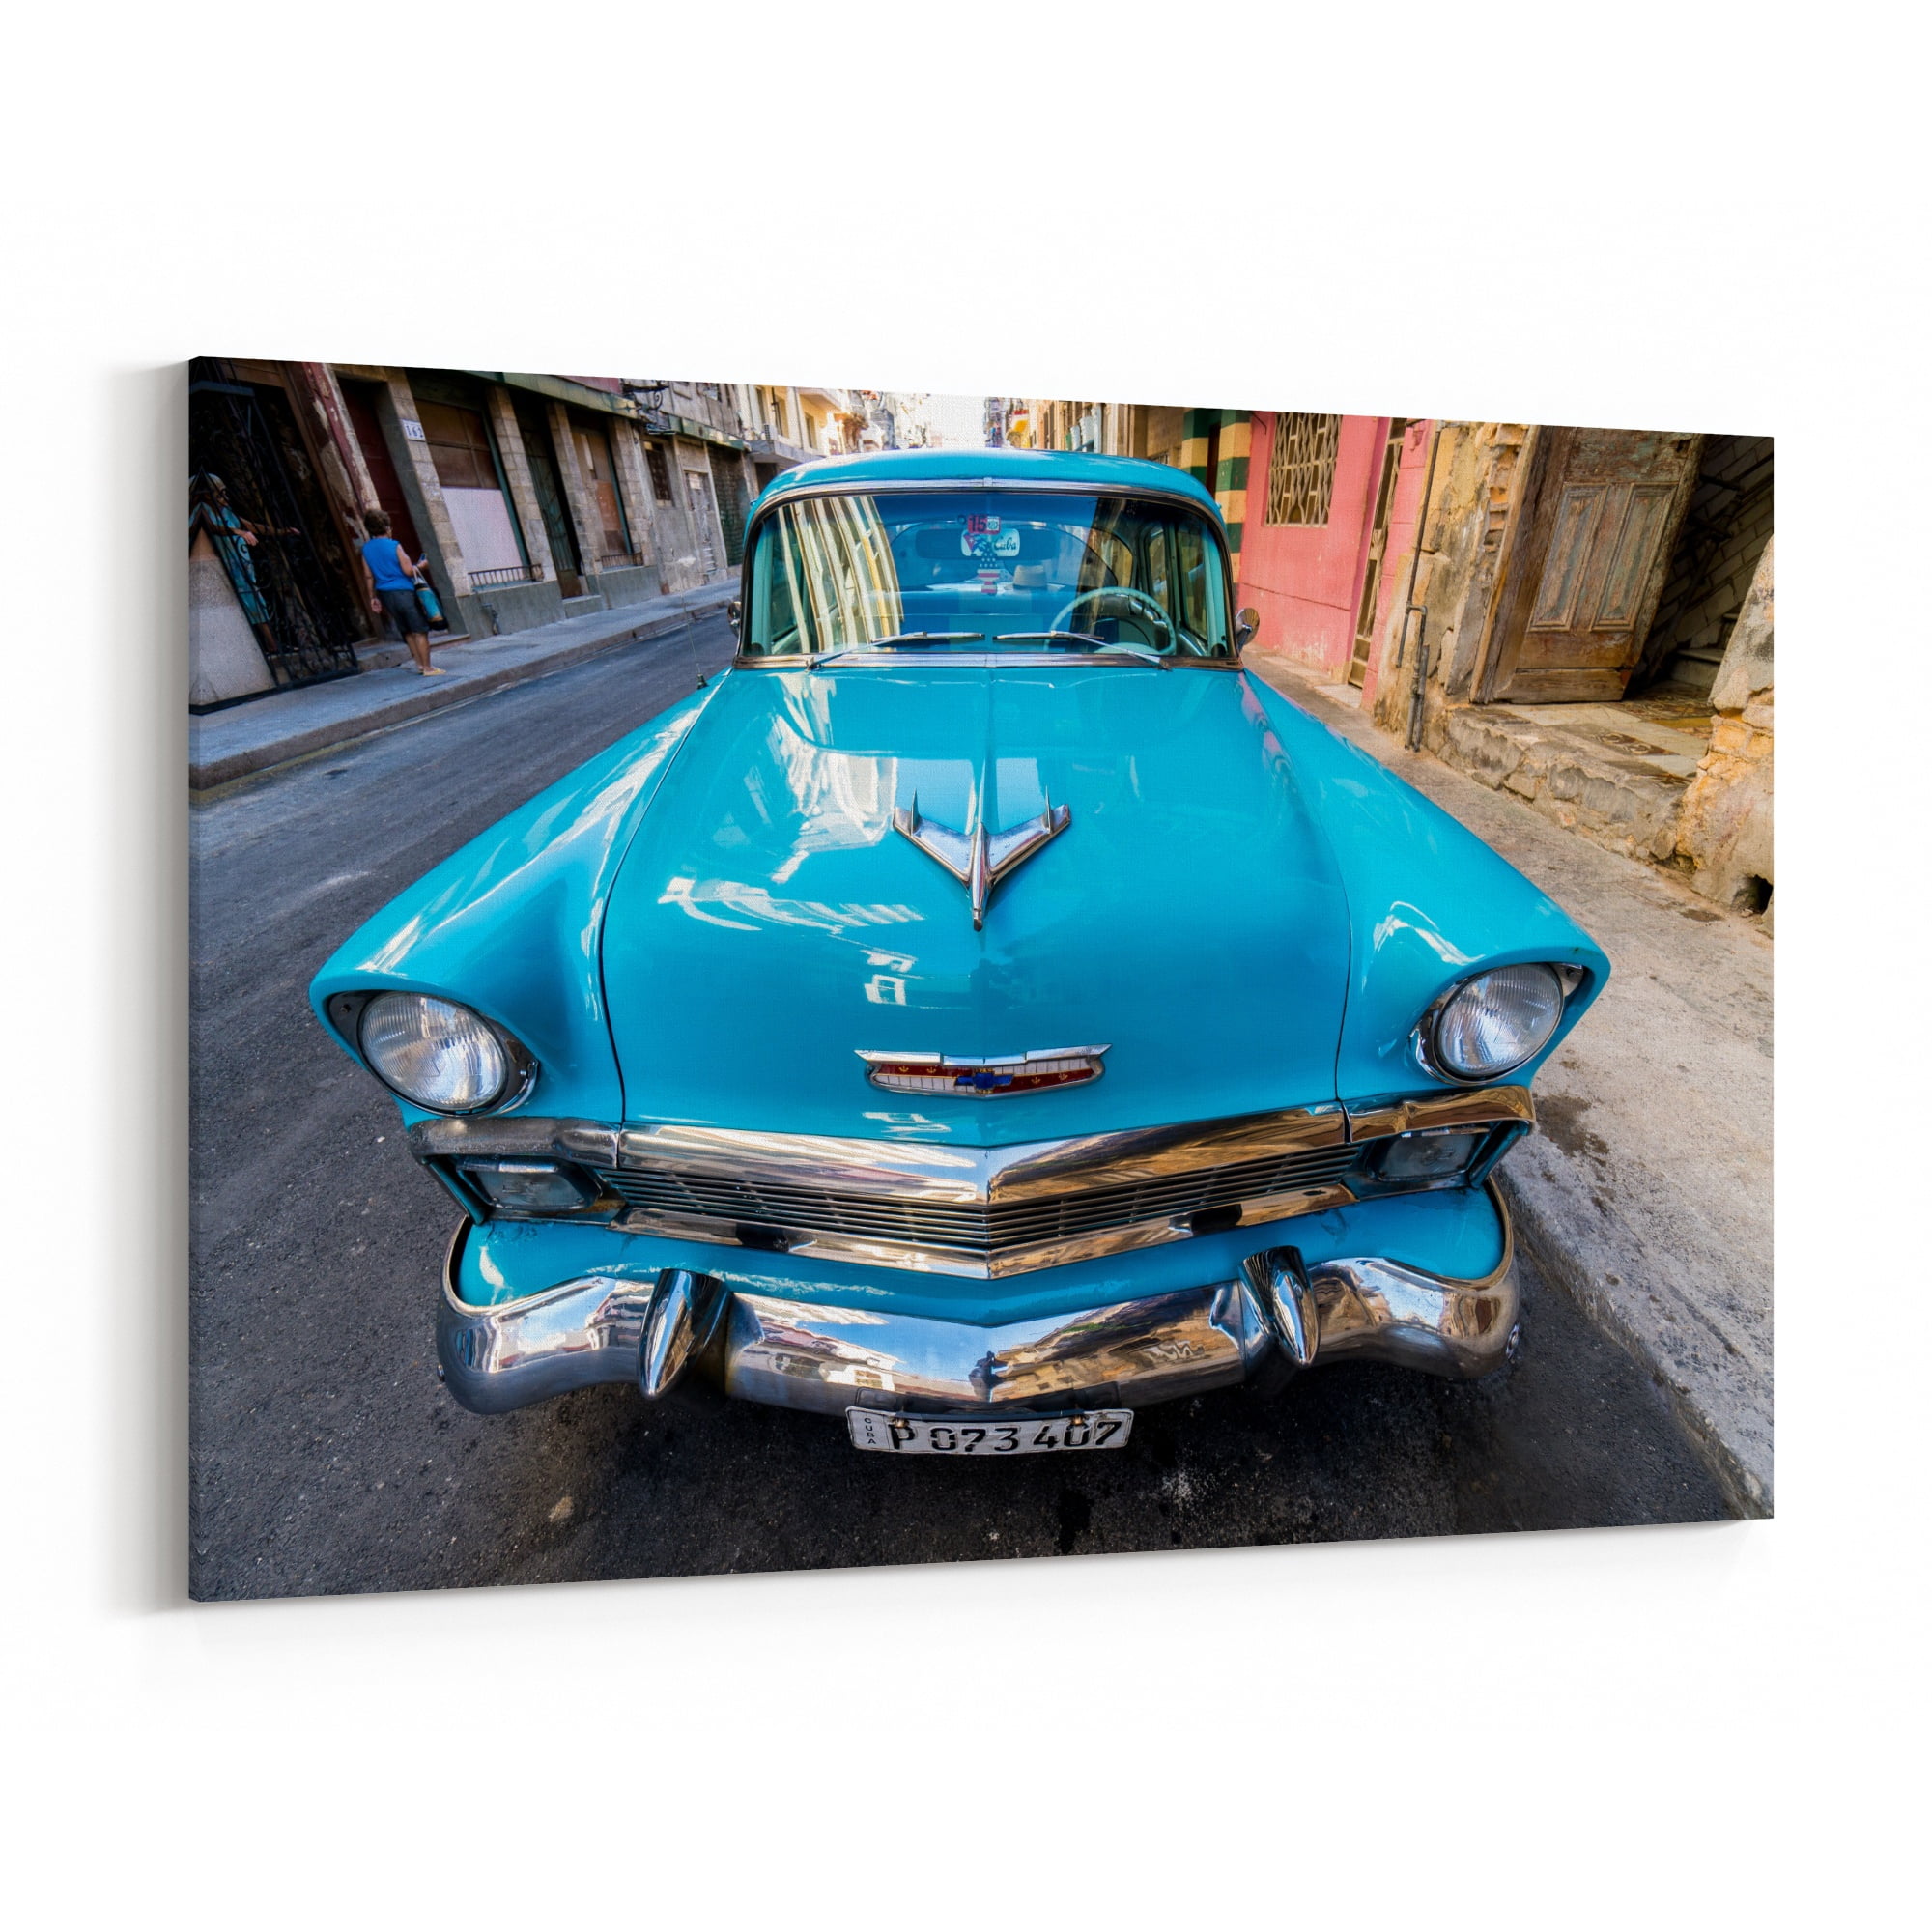 1957 Yellow Chevy Bel Air Vintage Classic Car Picture Wall Decor Art Print 8x10 